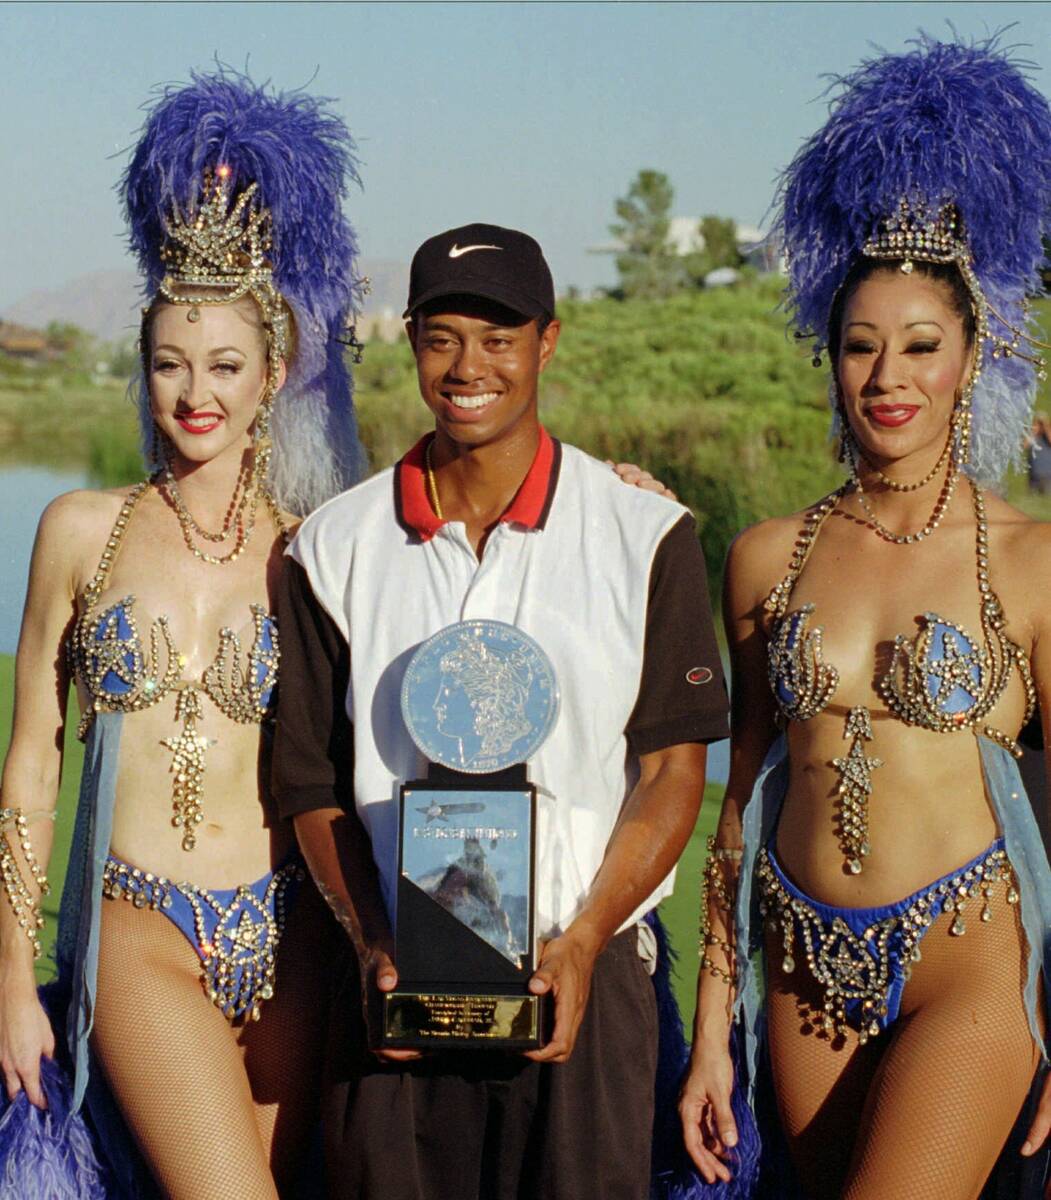 FILE - In this Oct. 6, 1996, file photo, Tiger Woods, center, poses with Ballys' Jubilee dancer ...